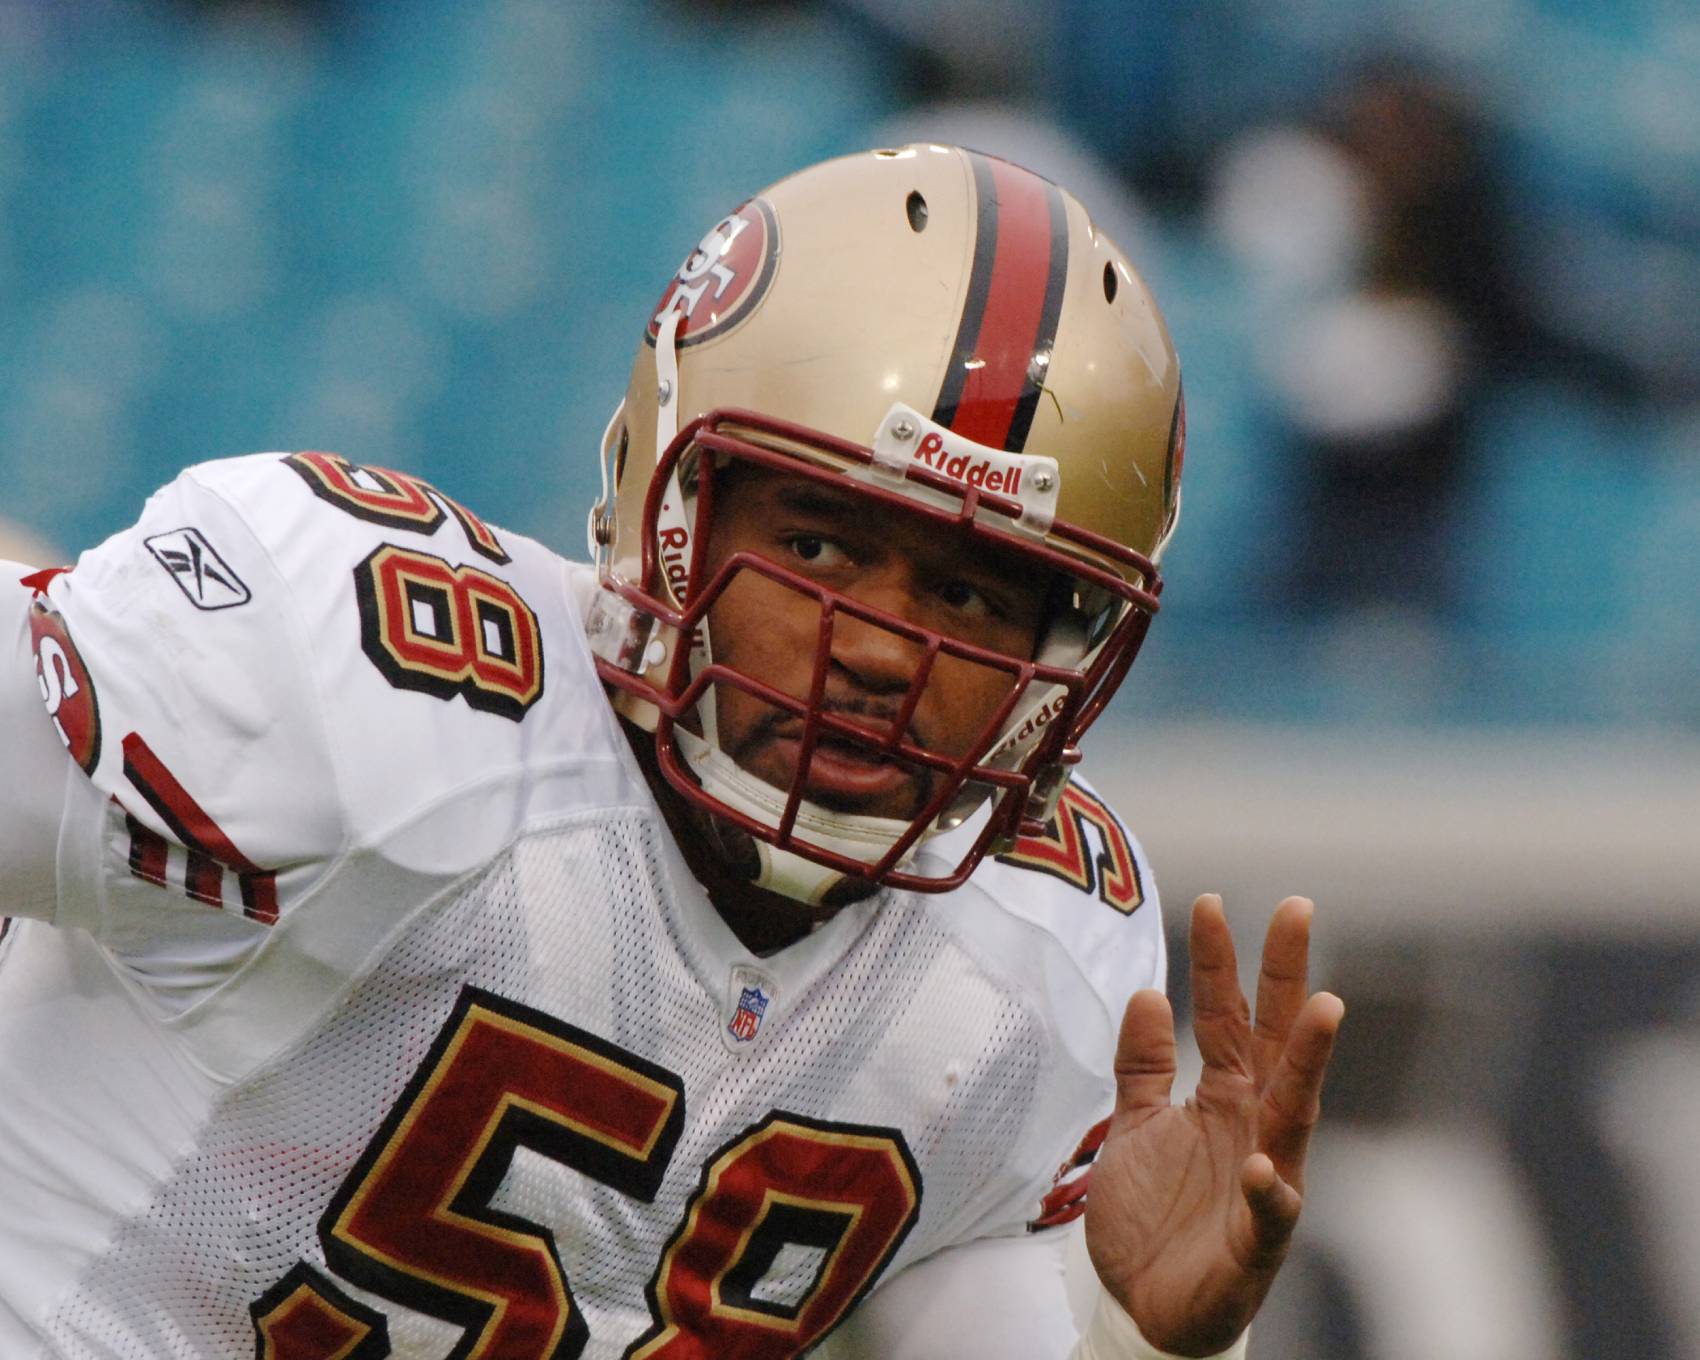 Former San Francisco 49ers defender Corey Smith disappeared in 2009, six years after he won a Super Bowl with the Tampa Bay Buccaneers.